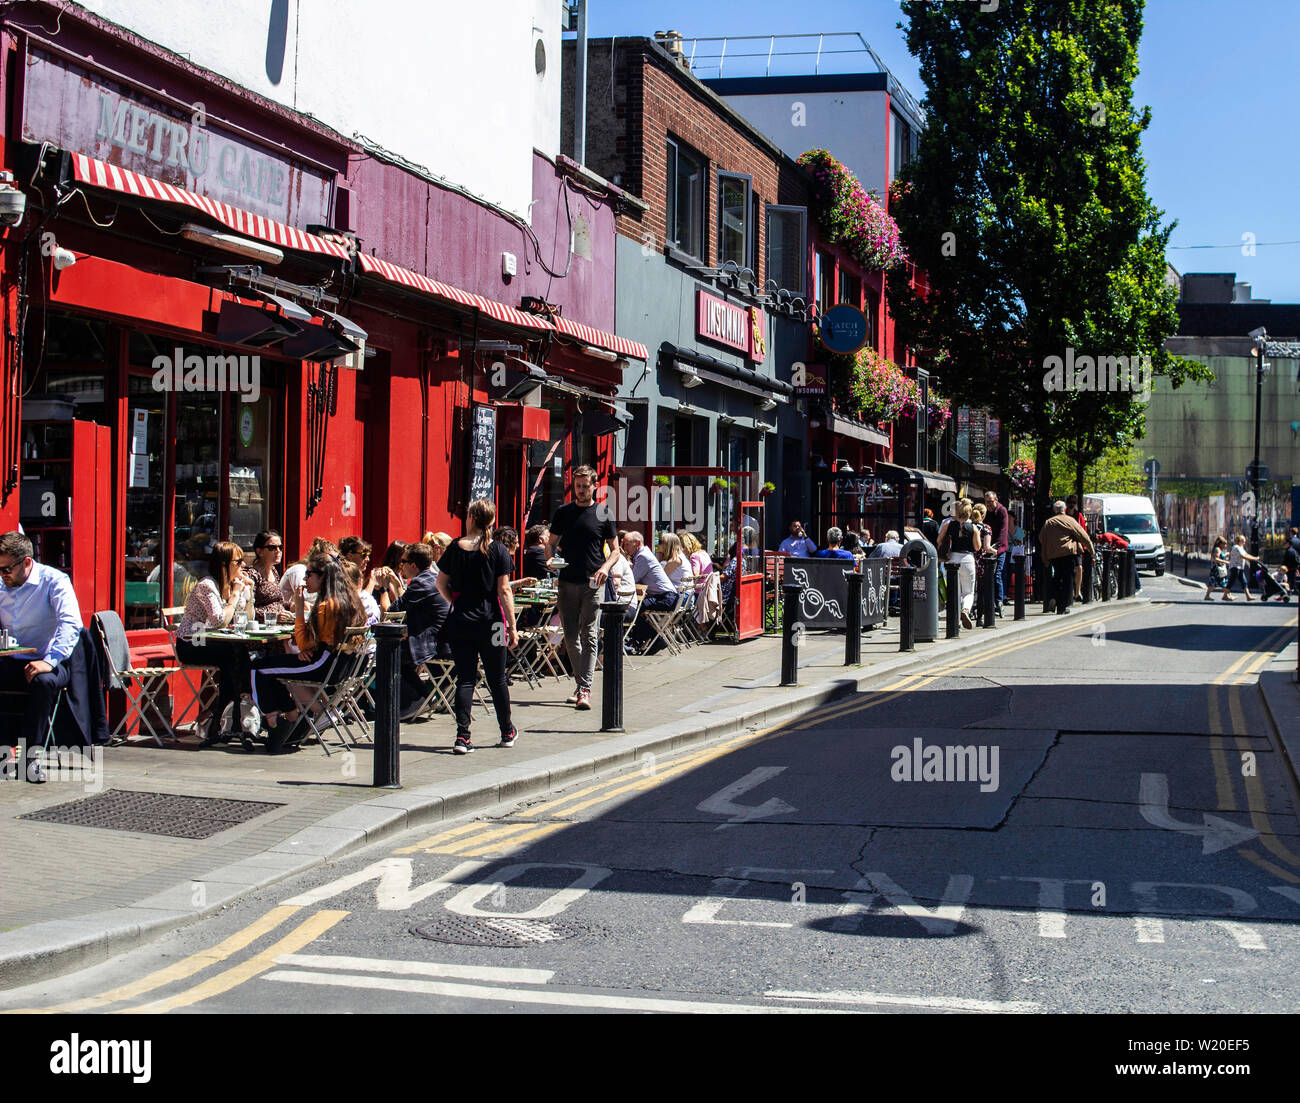 Dubliners enjoying the summer weather dining out in a city street. Stock Photo